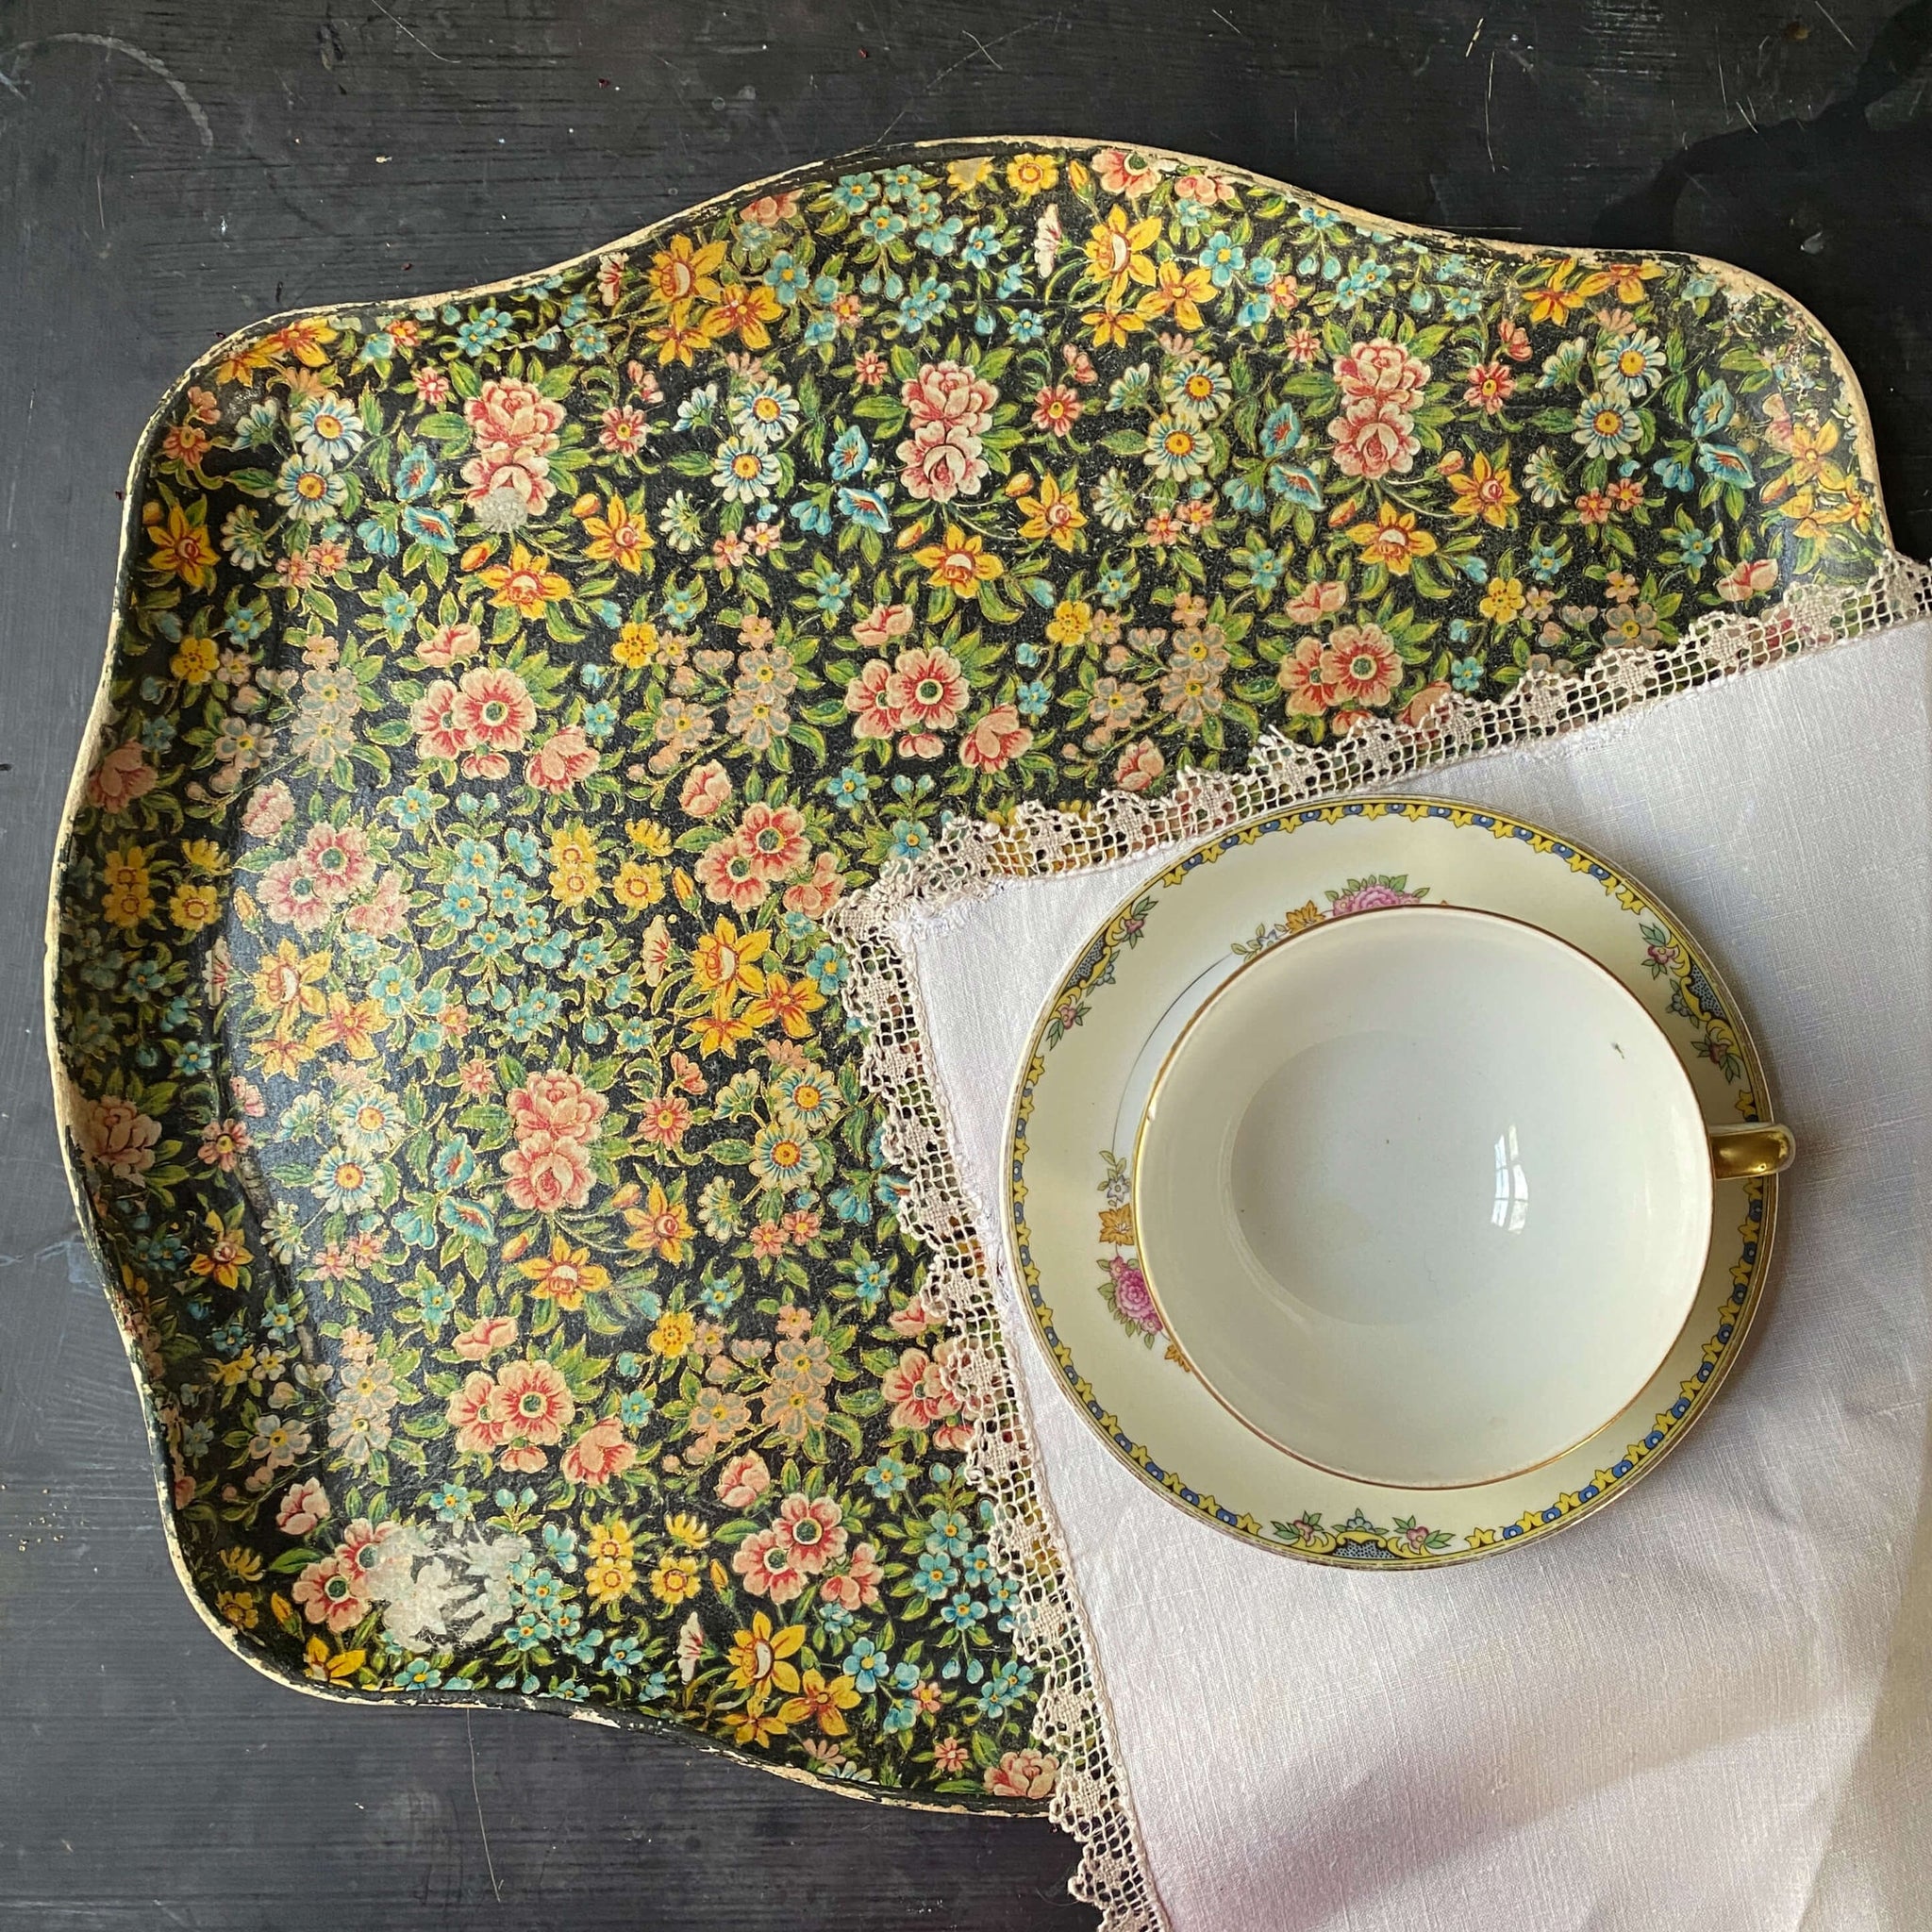 Vintage Midcentury Paper Mache Tray - Black Floral Chintz by Highmount Quality circa 1960s